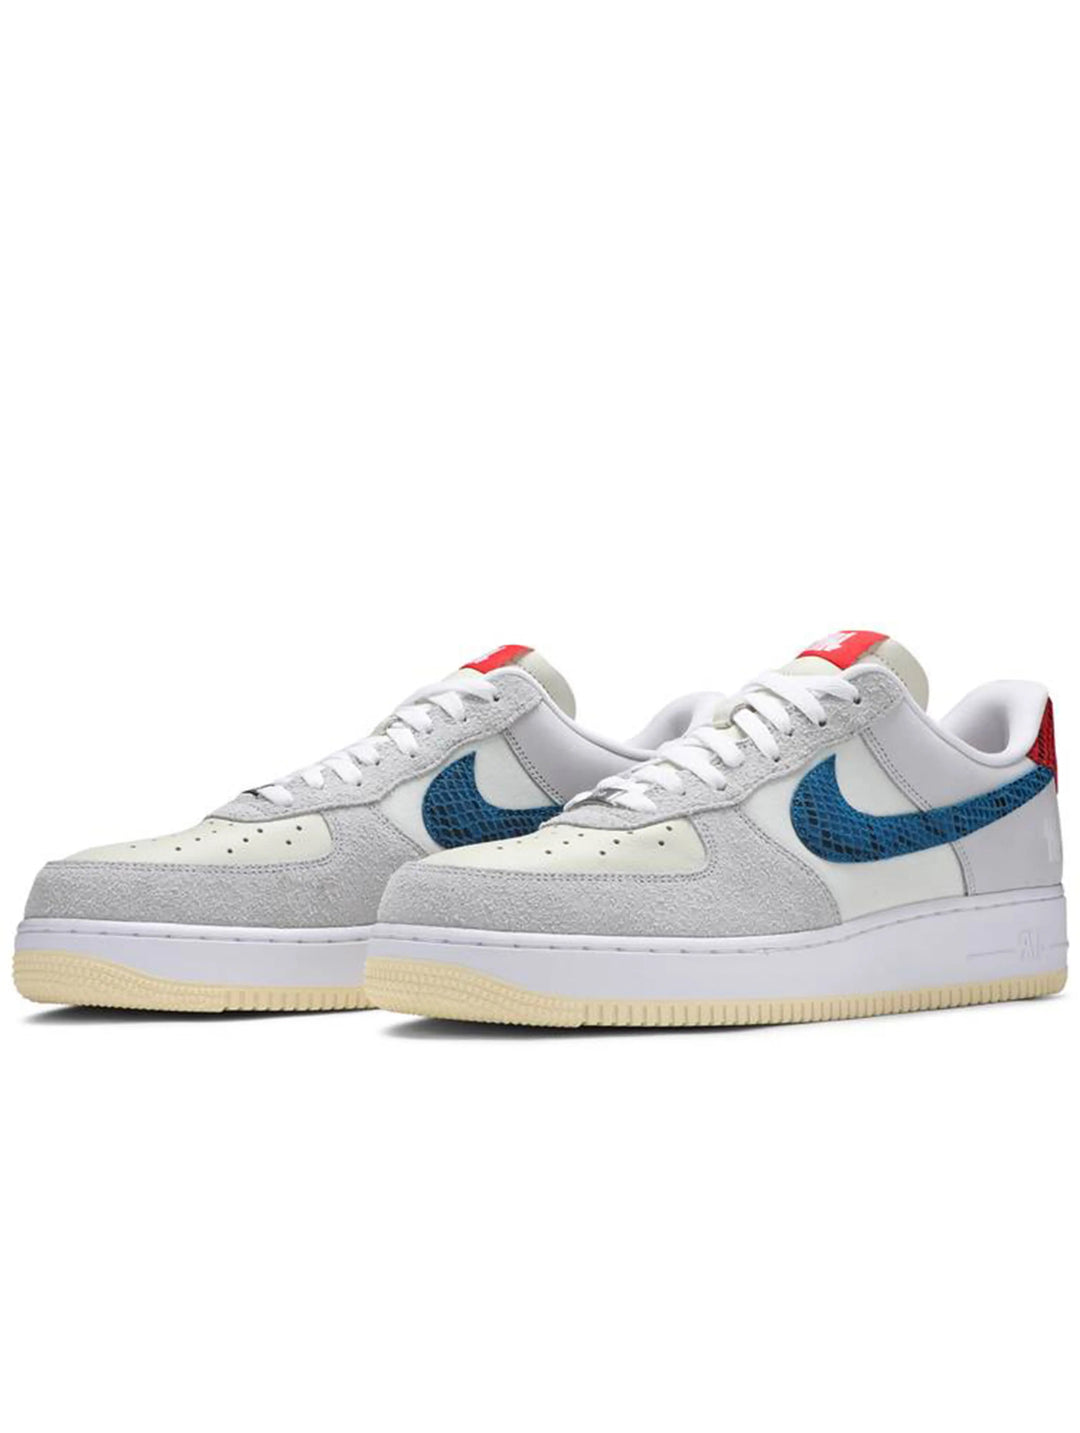 Nike Air Force 1 Low SP Undefeated 5 On It Prior